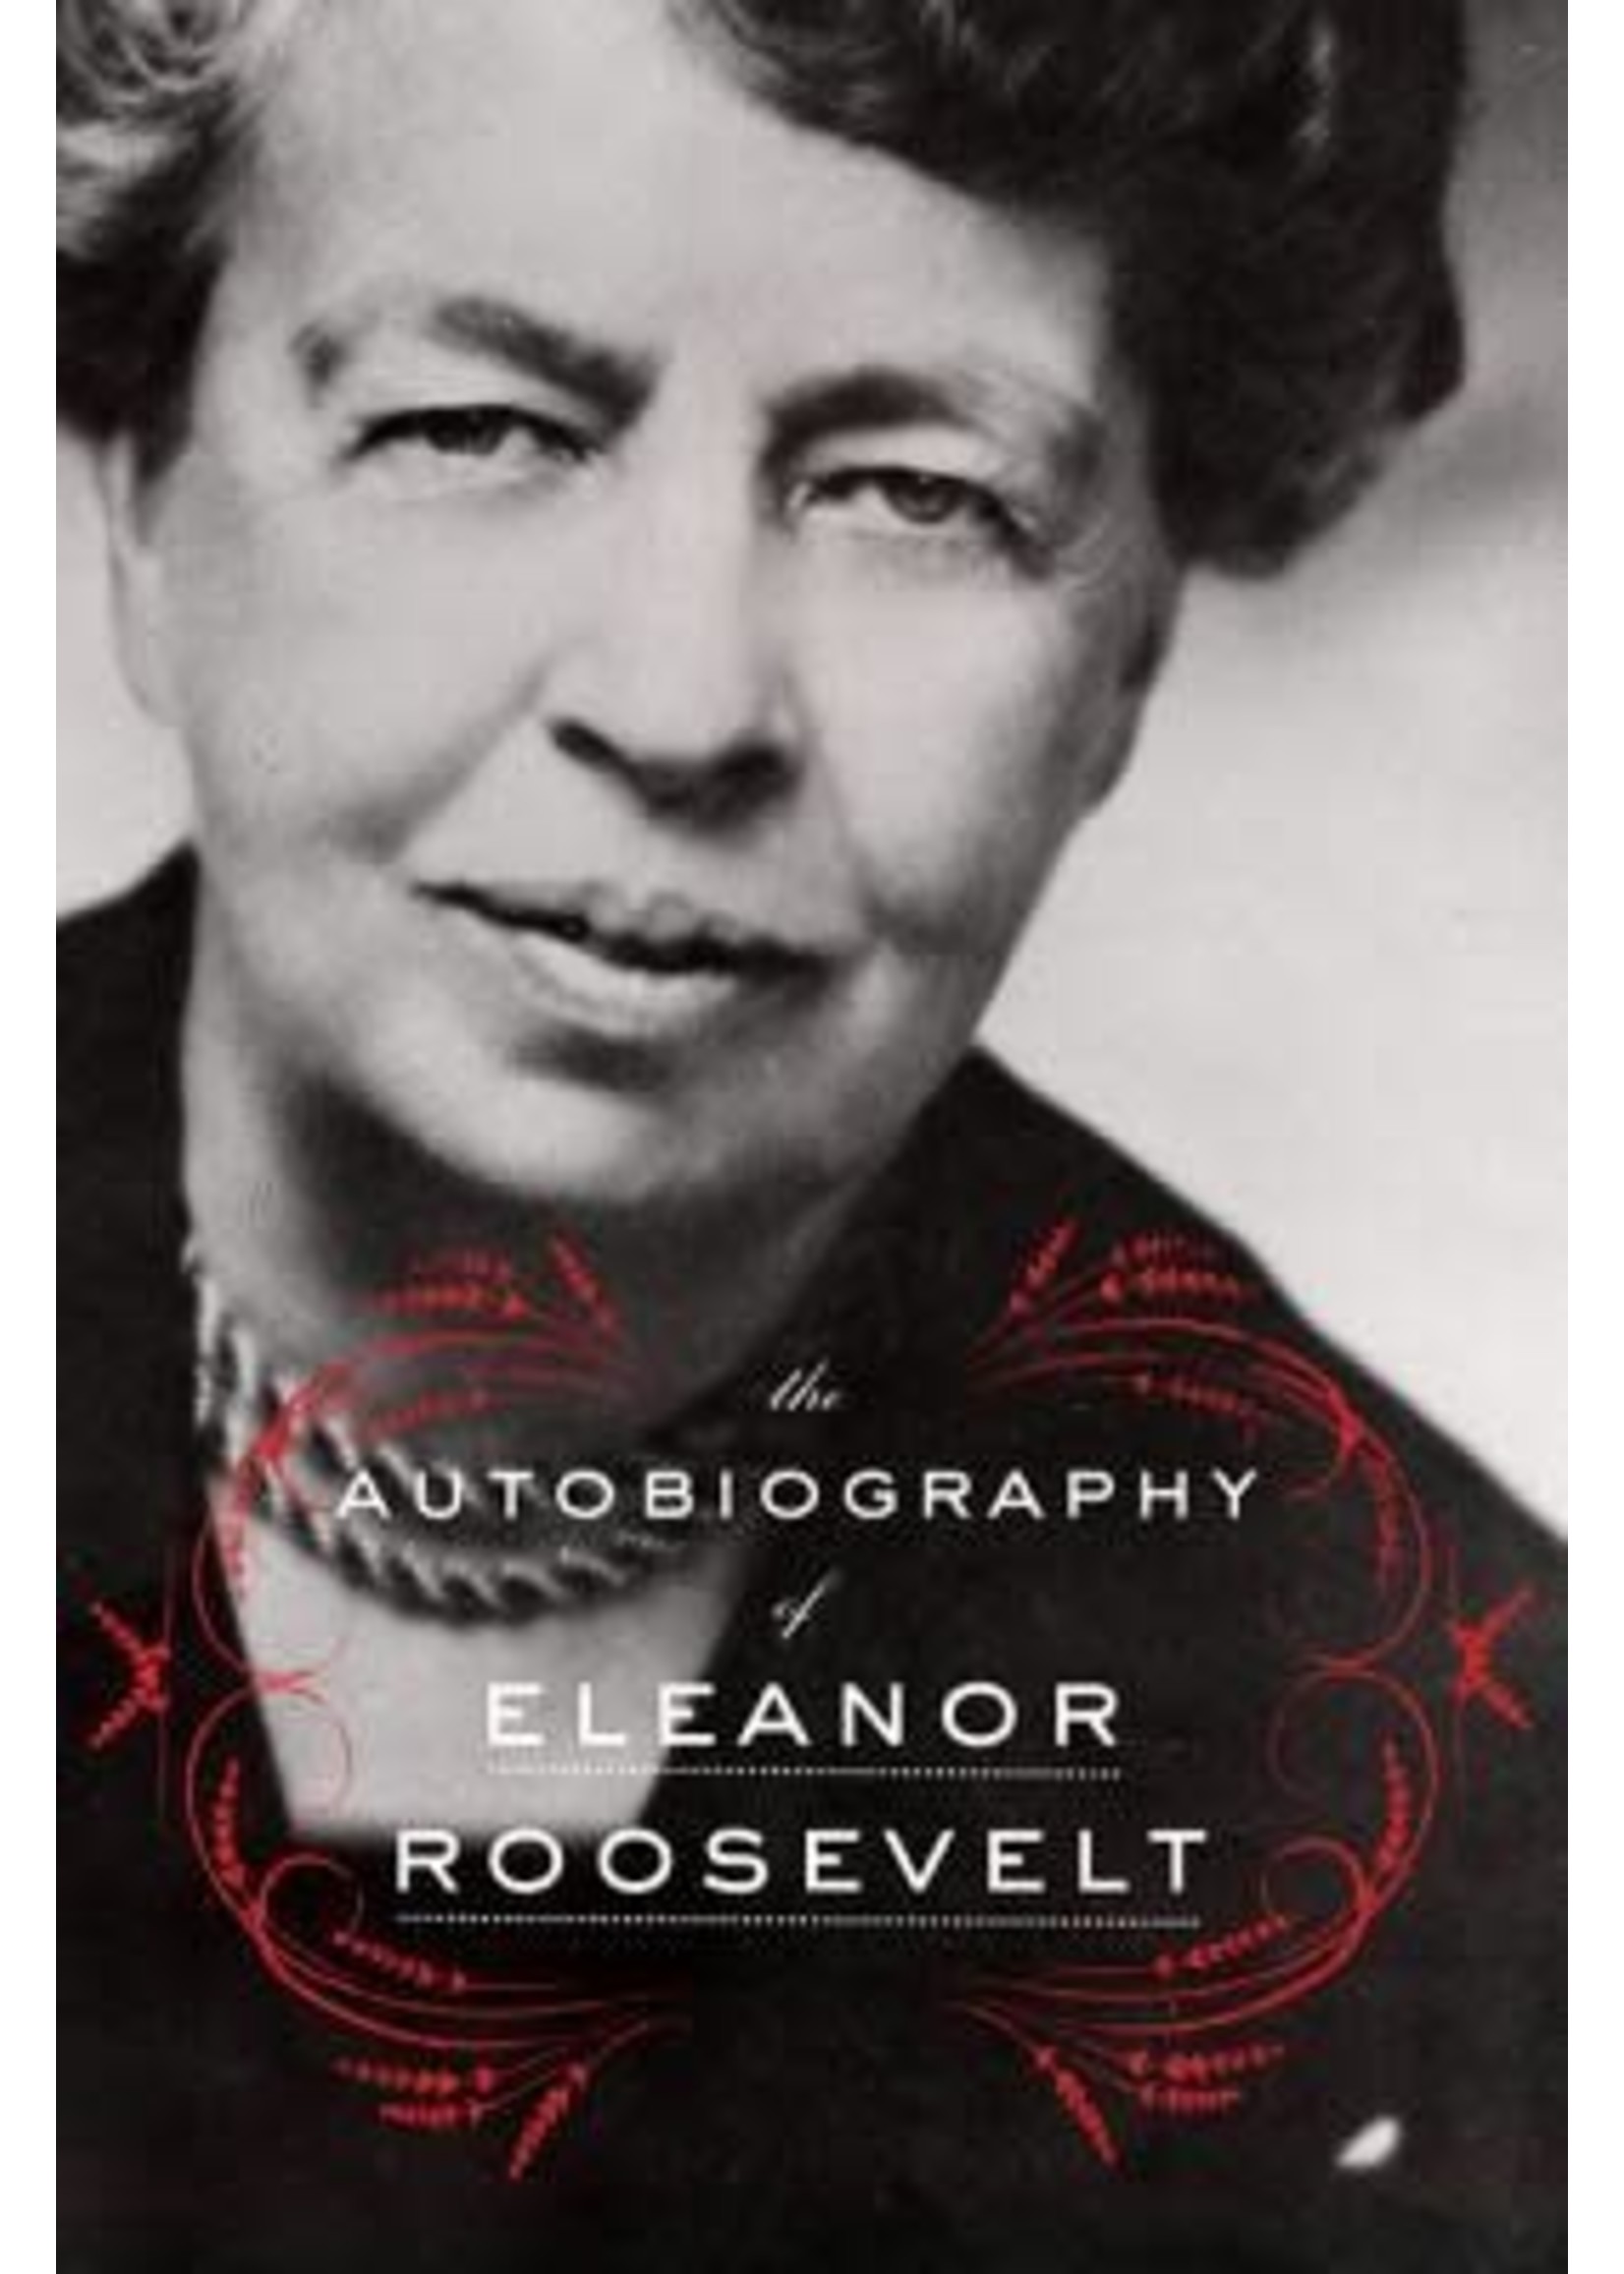 The Autobiography of Eleanor Roosevelt by Eleanor Roosevelt